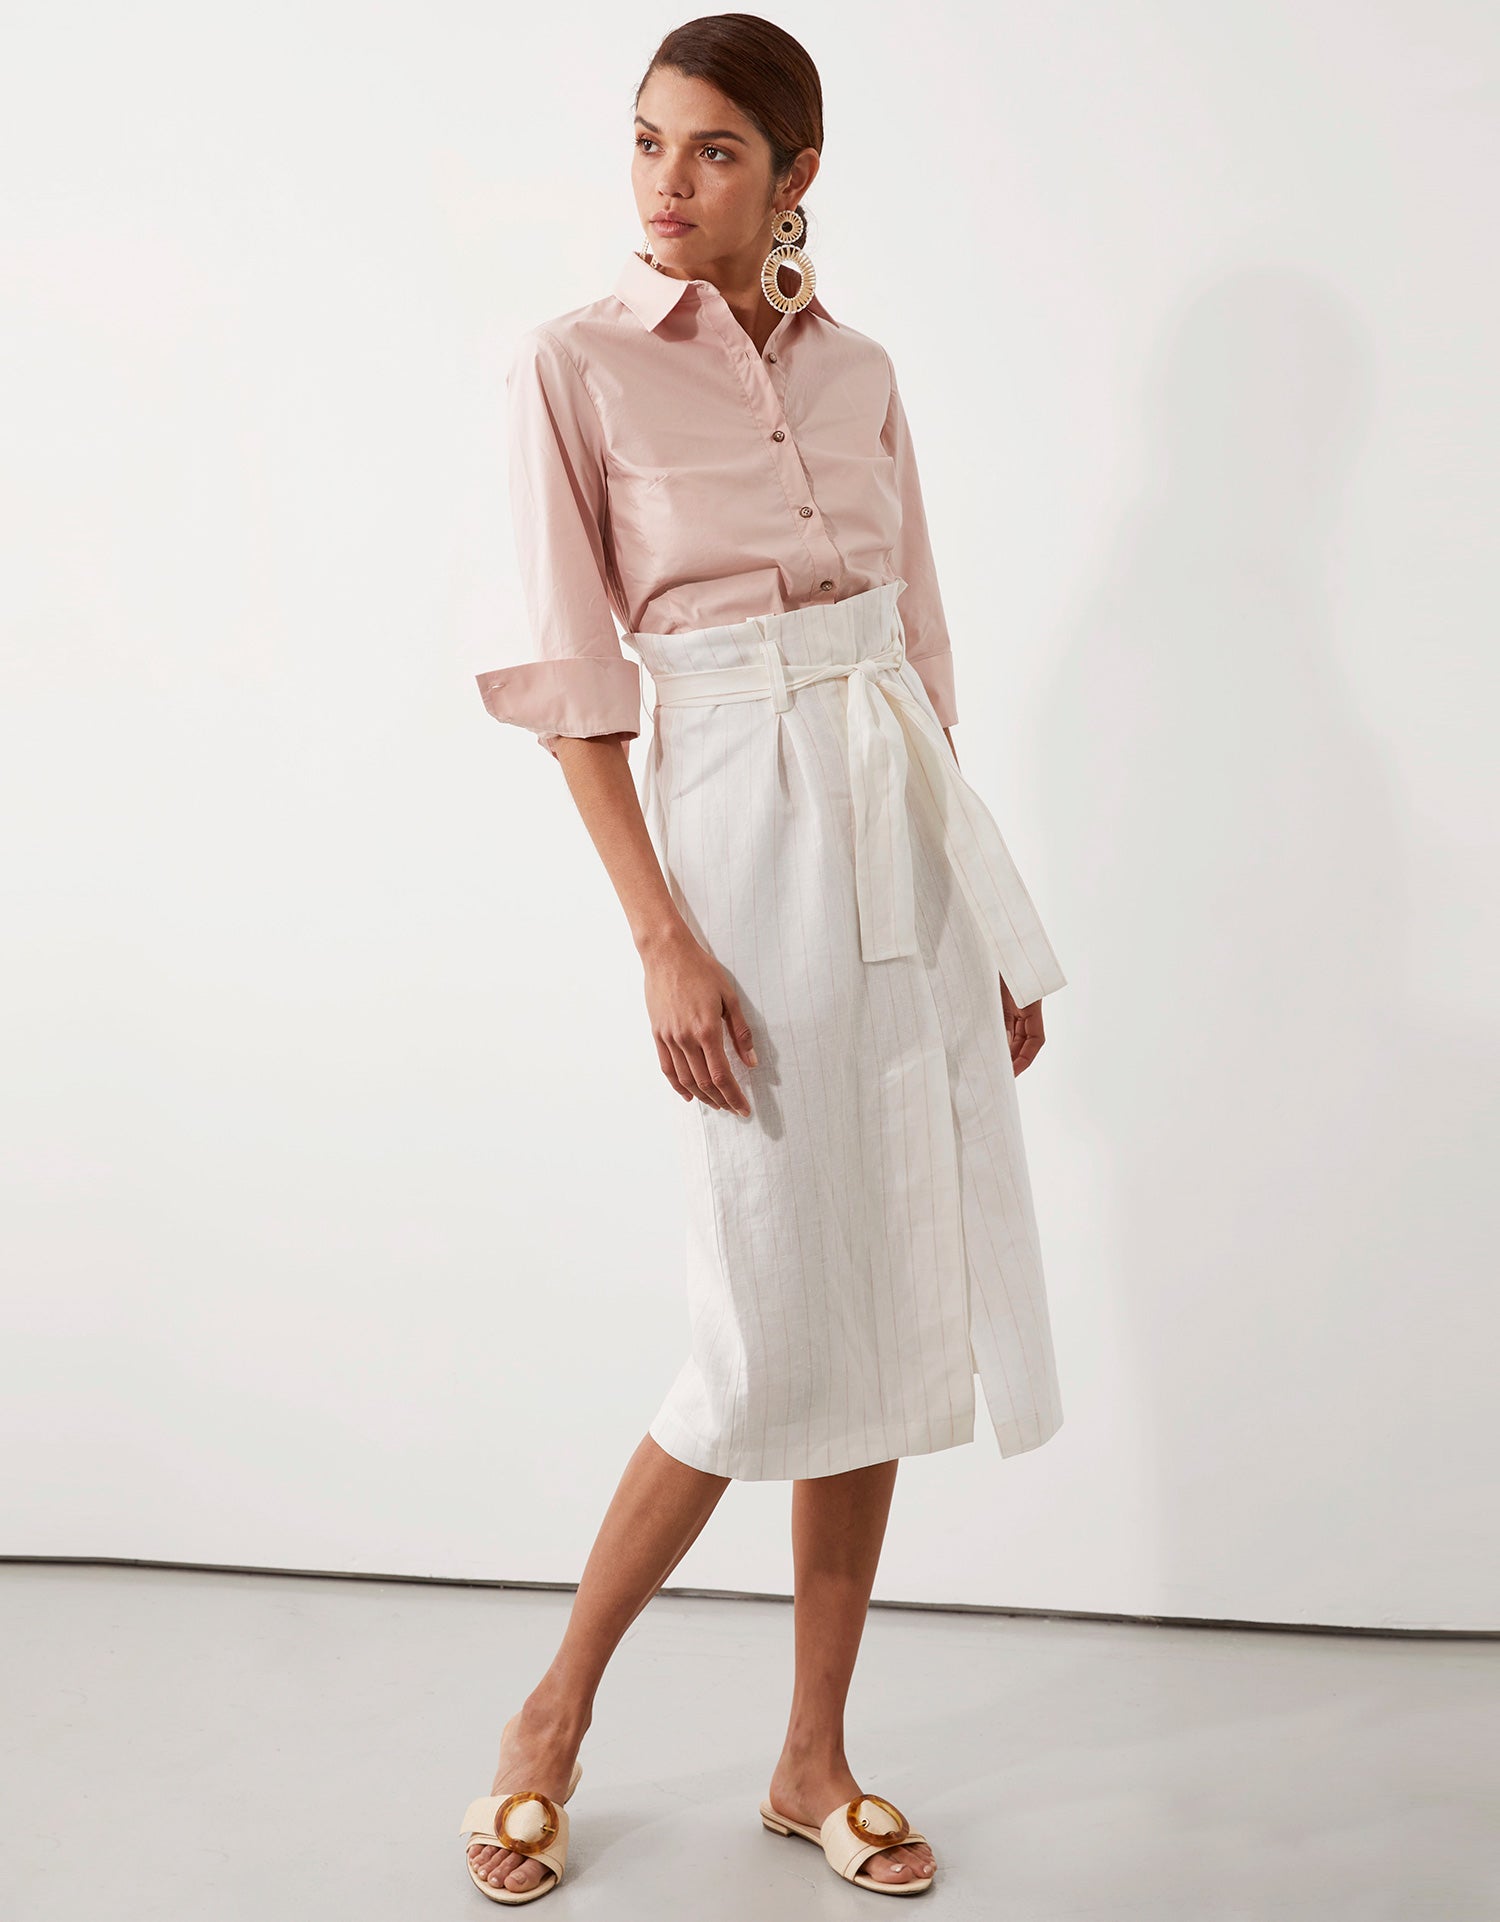 Parker Button Through in Pink and Freya Belted Skirt by Apartment Clothing